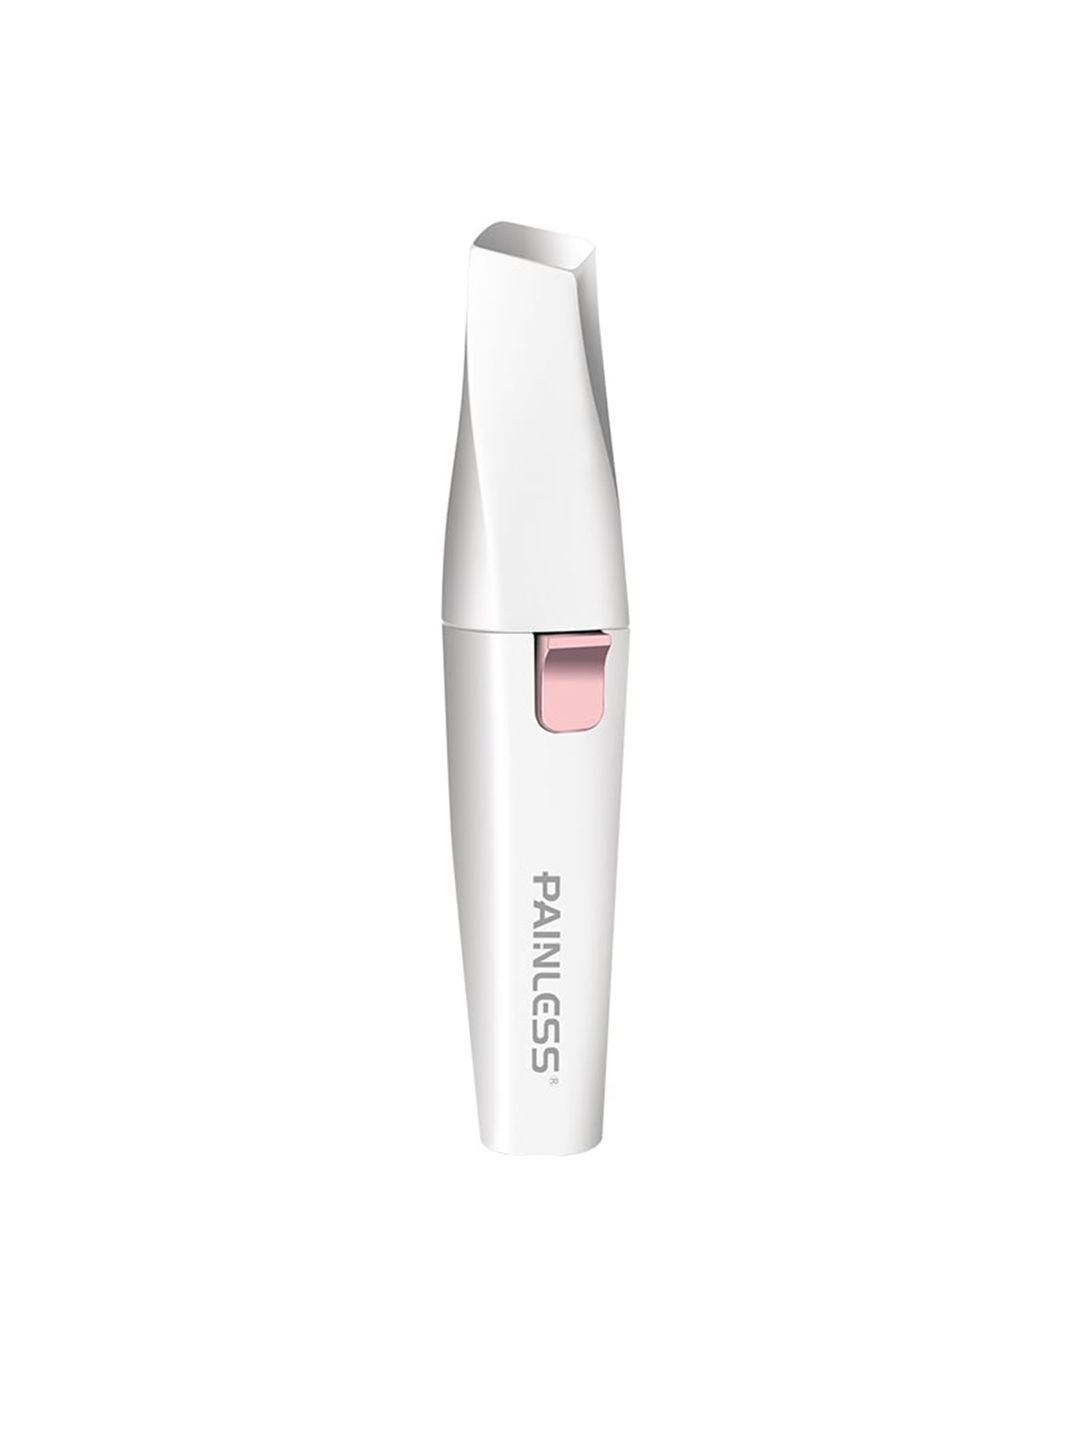 PAINLESS 2-in-1 Facial & Eyebrow Hair Remover - White Price in India